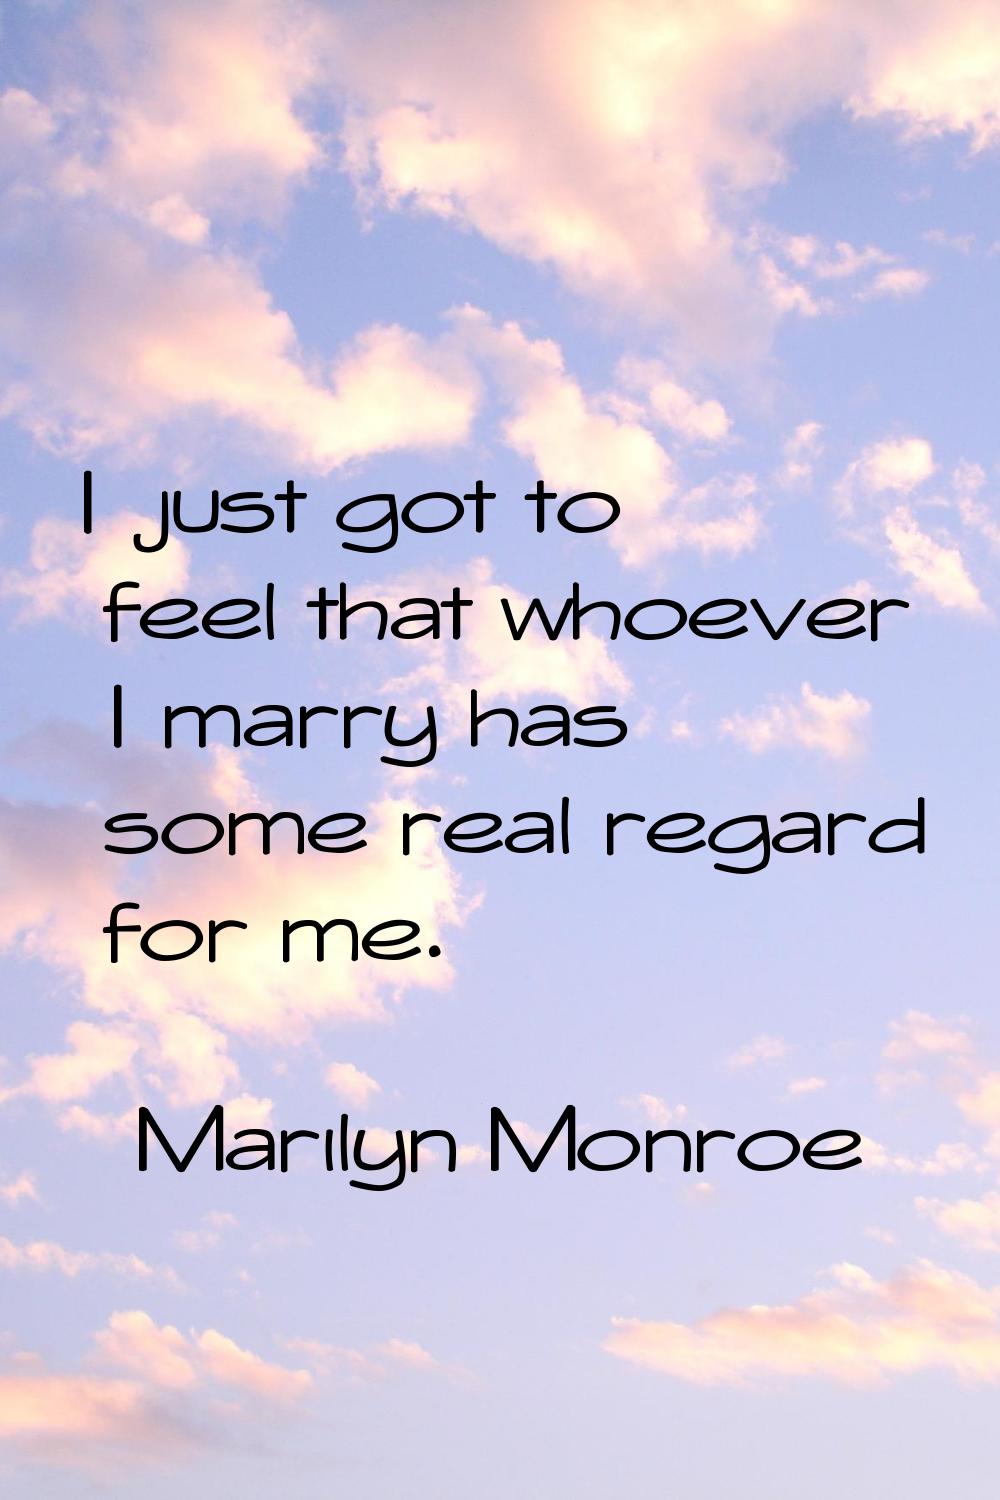 I just got to feel that whoever I marry has some real regard for me.